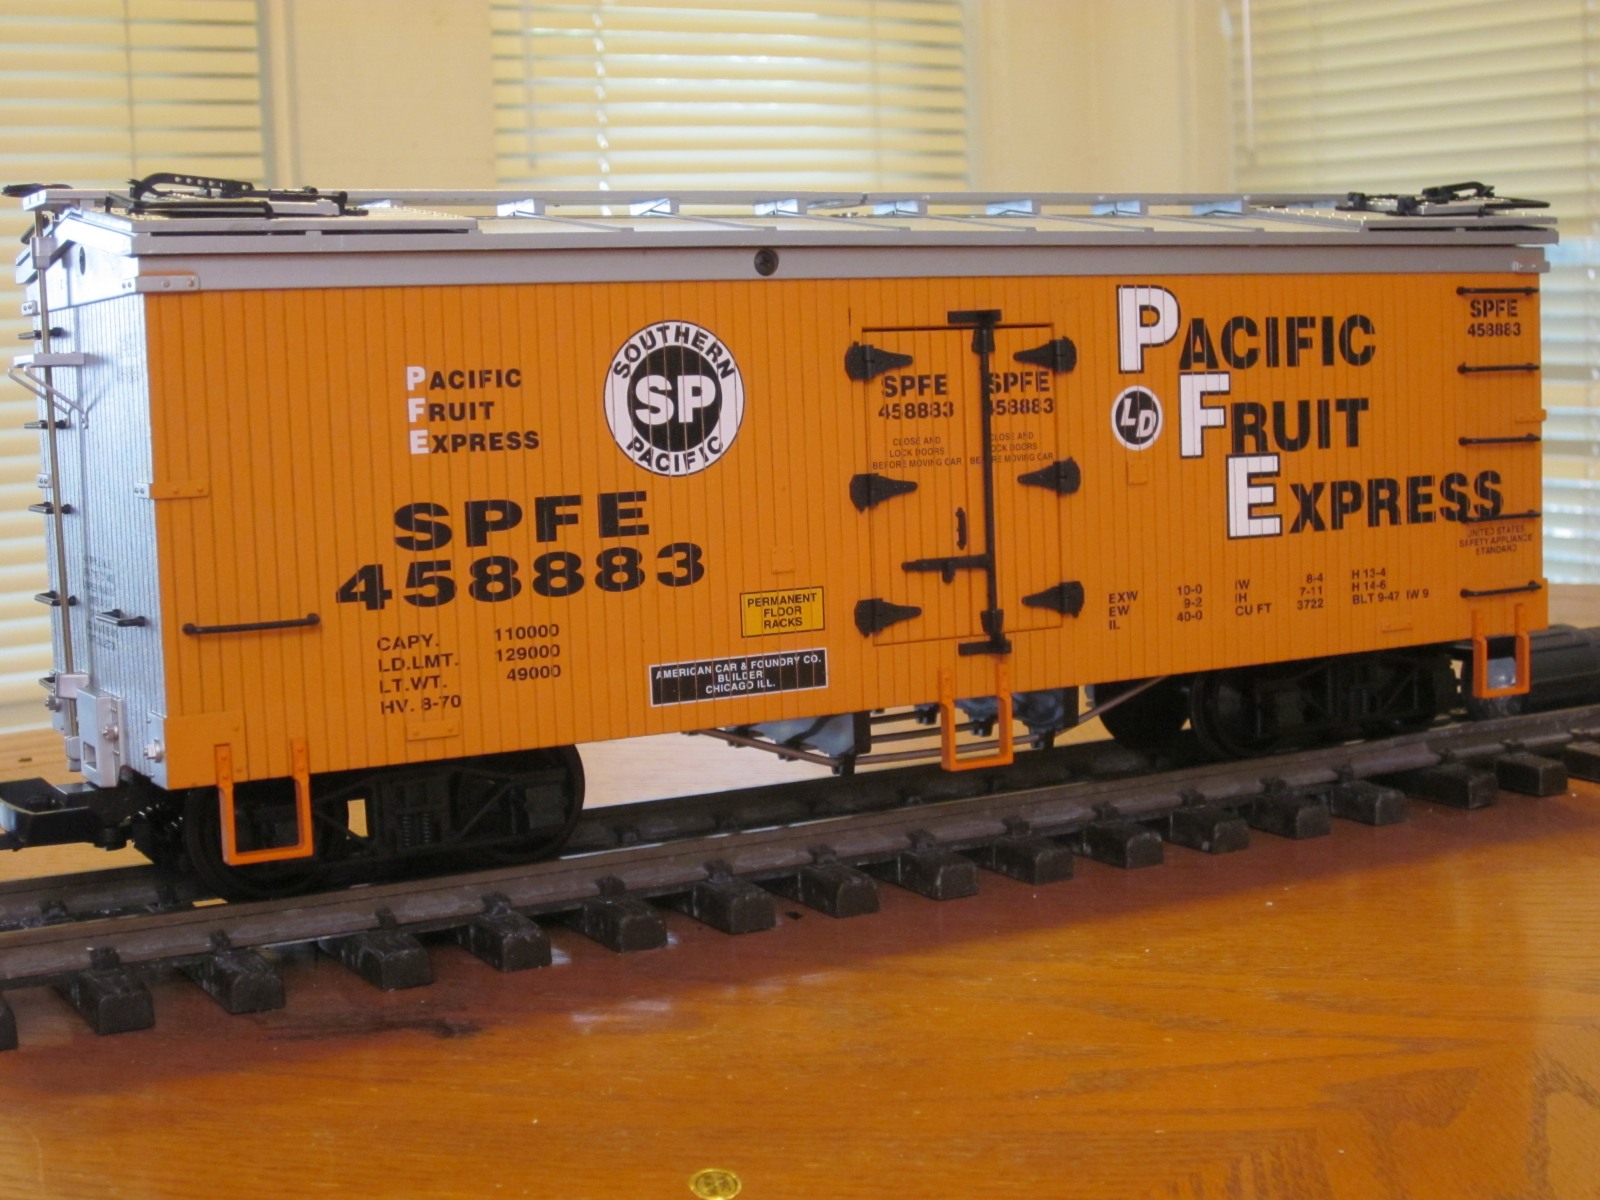 R16202D Southern Pacific PFE SPFE 458883